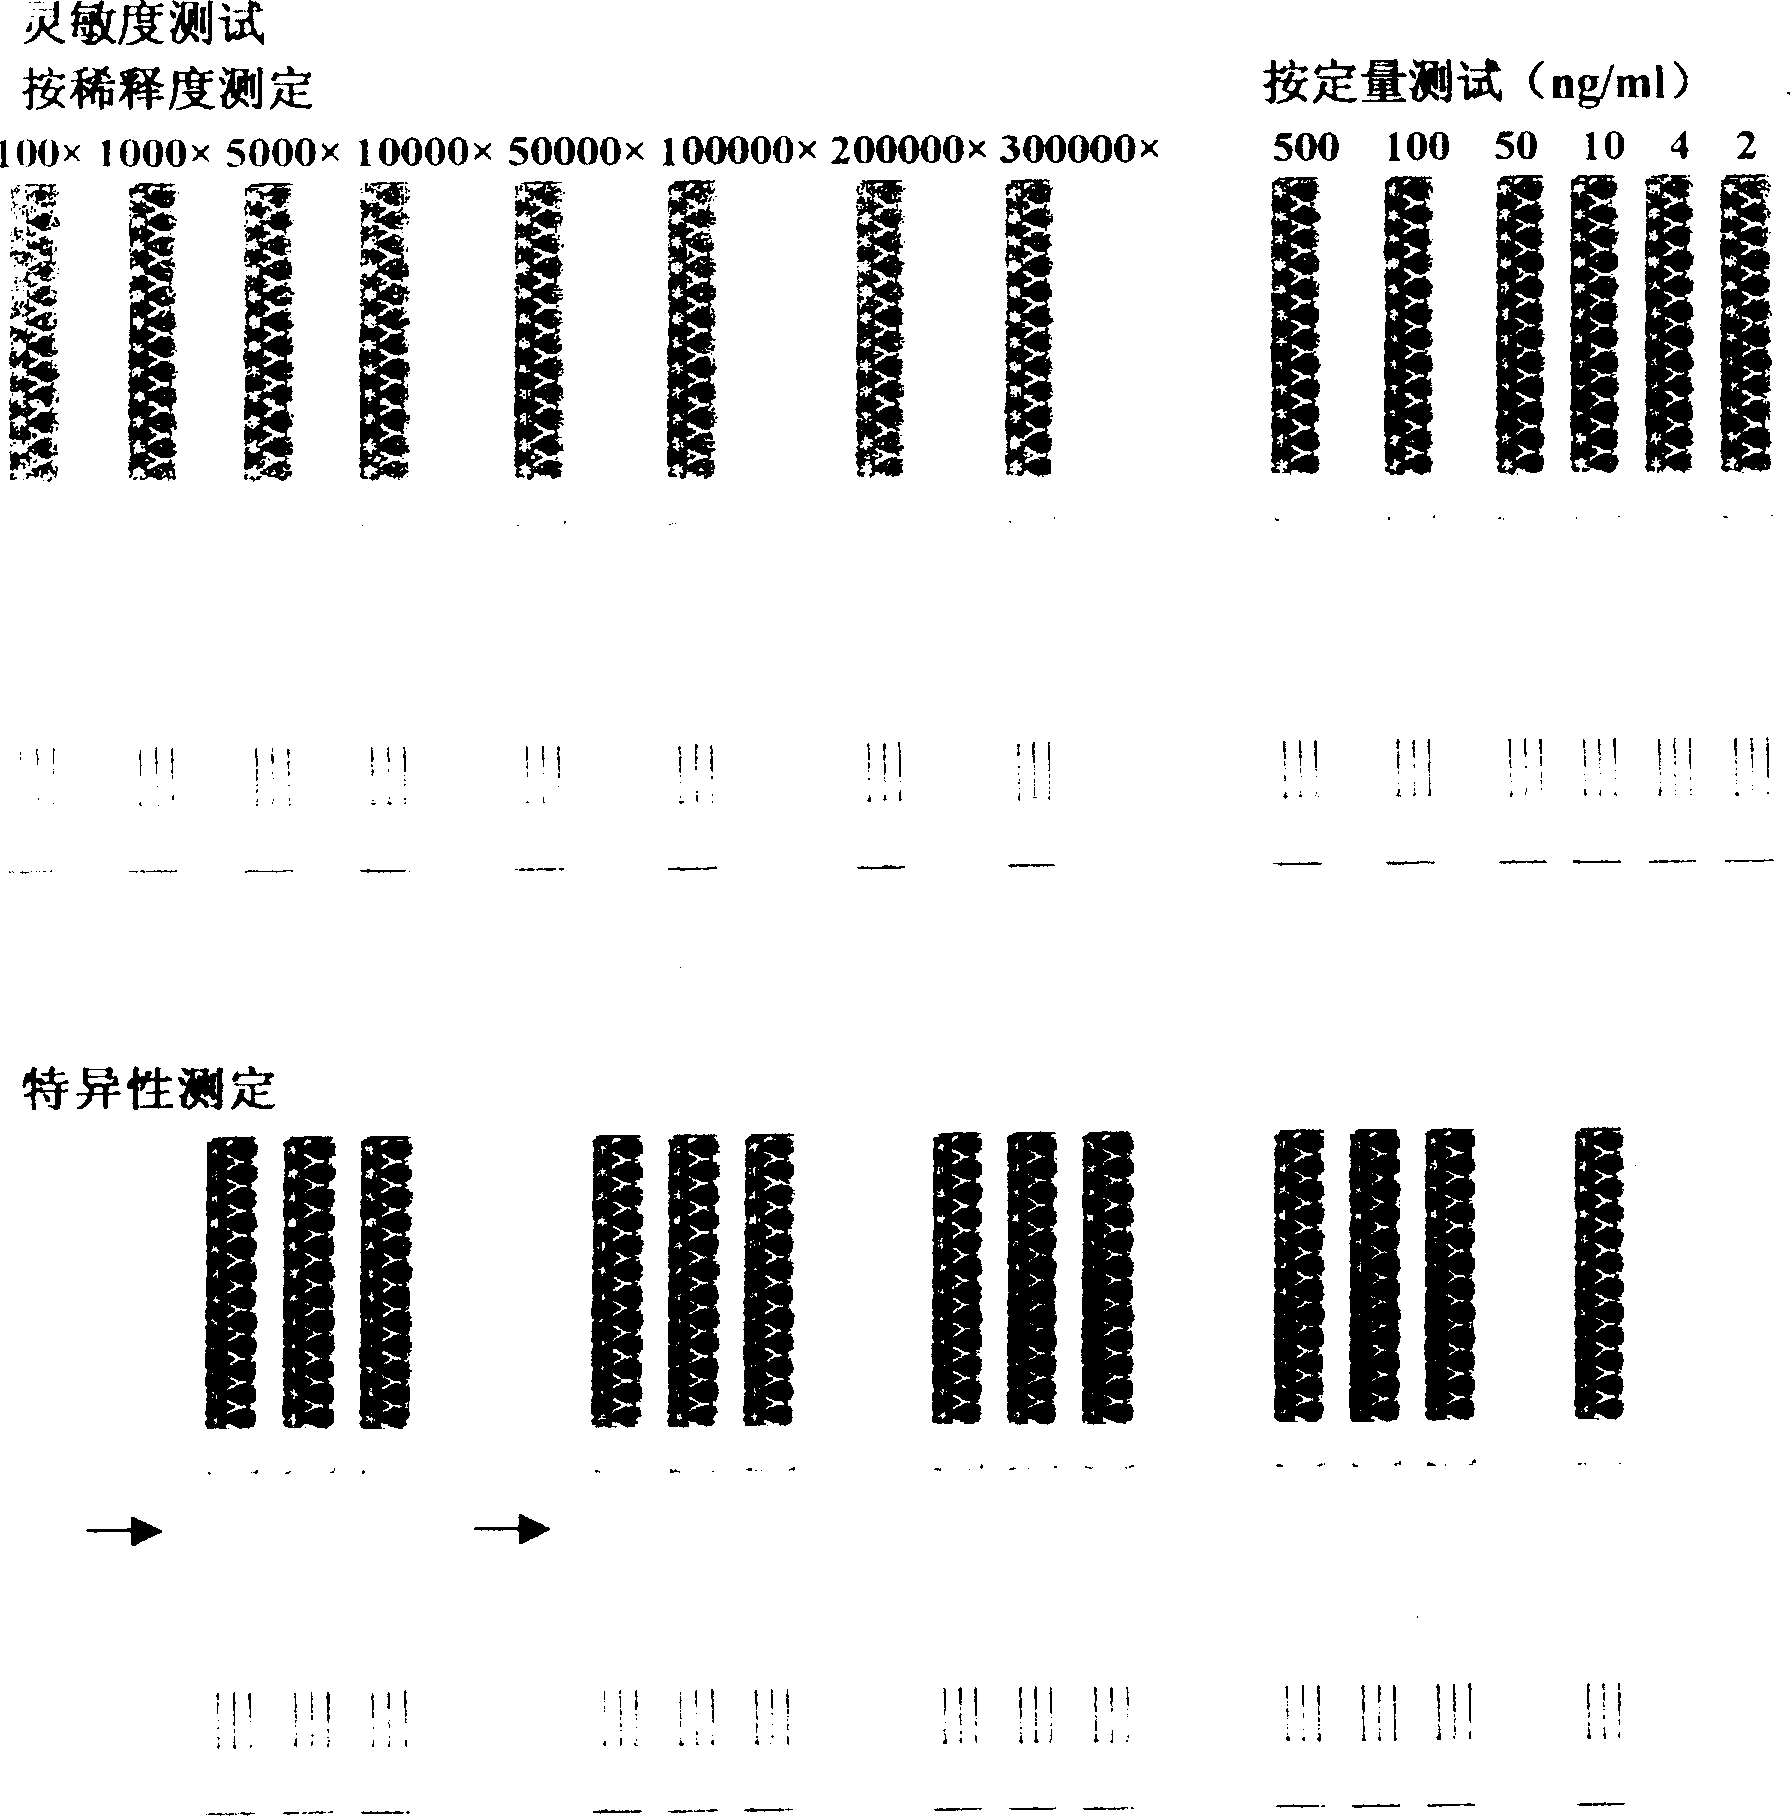 Antihuman seminal specific protein P30 detection reagent strips and monoclone antibody therewith